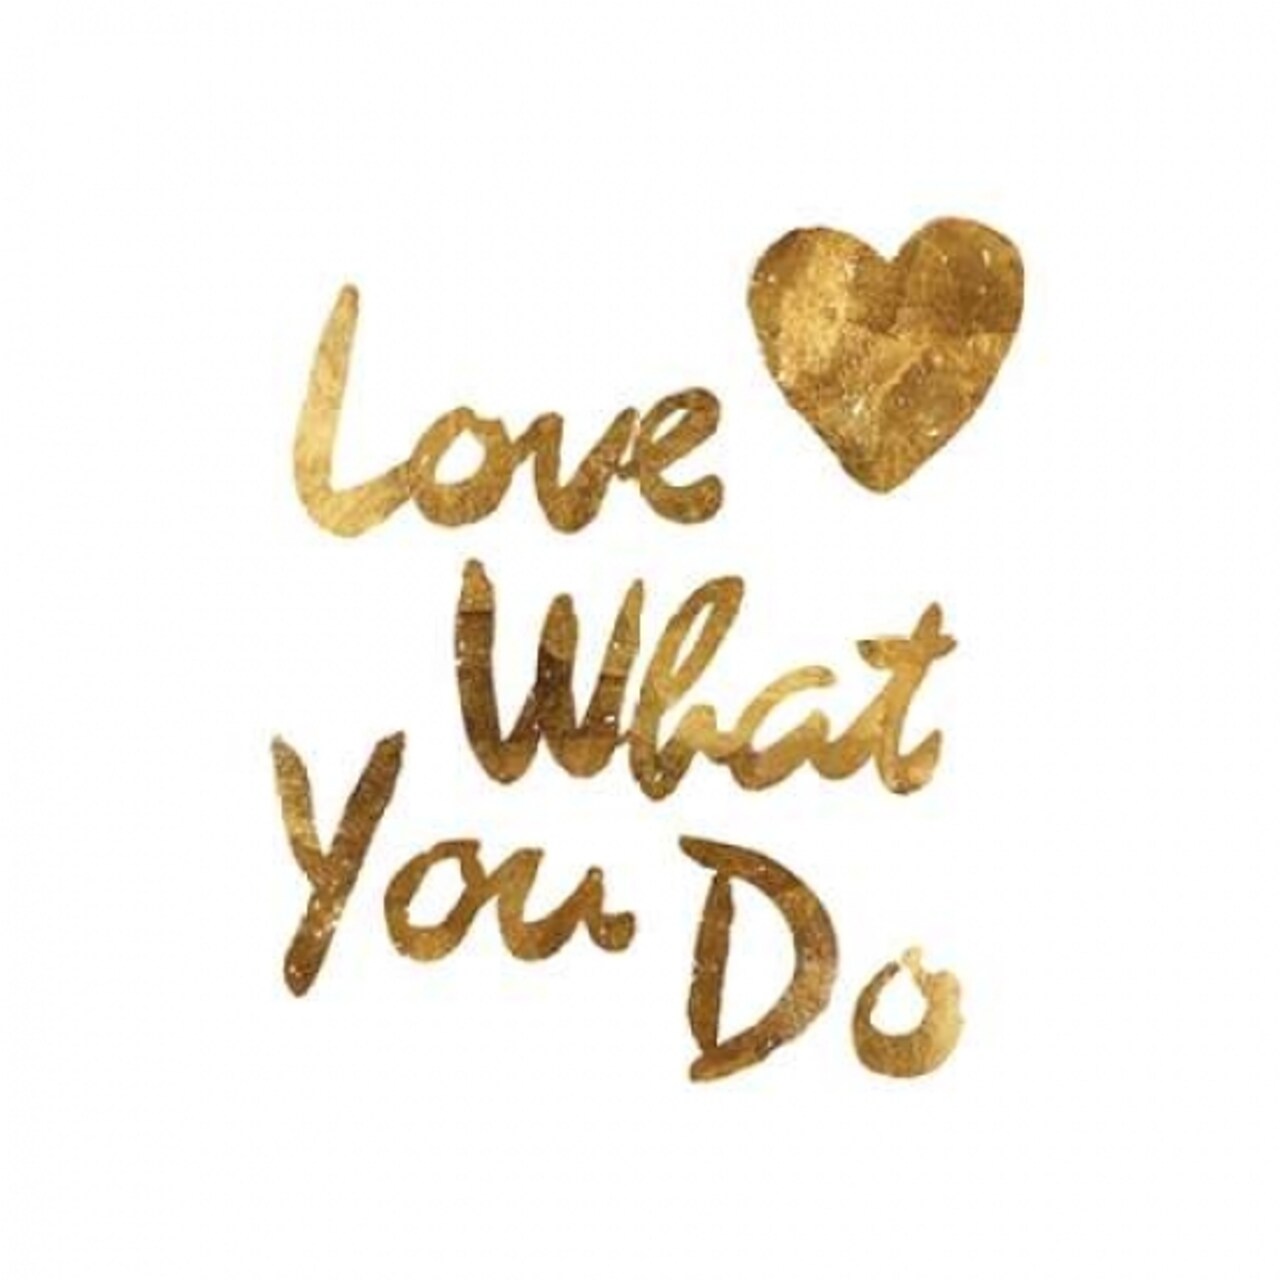 Love What you Do Heart Poster Print by PI Studio